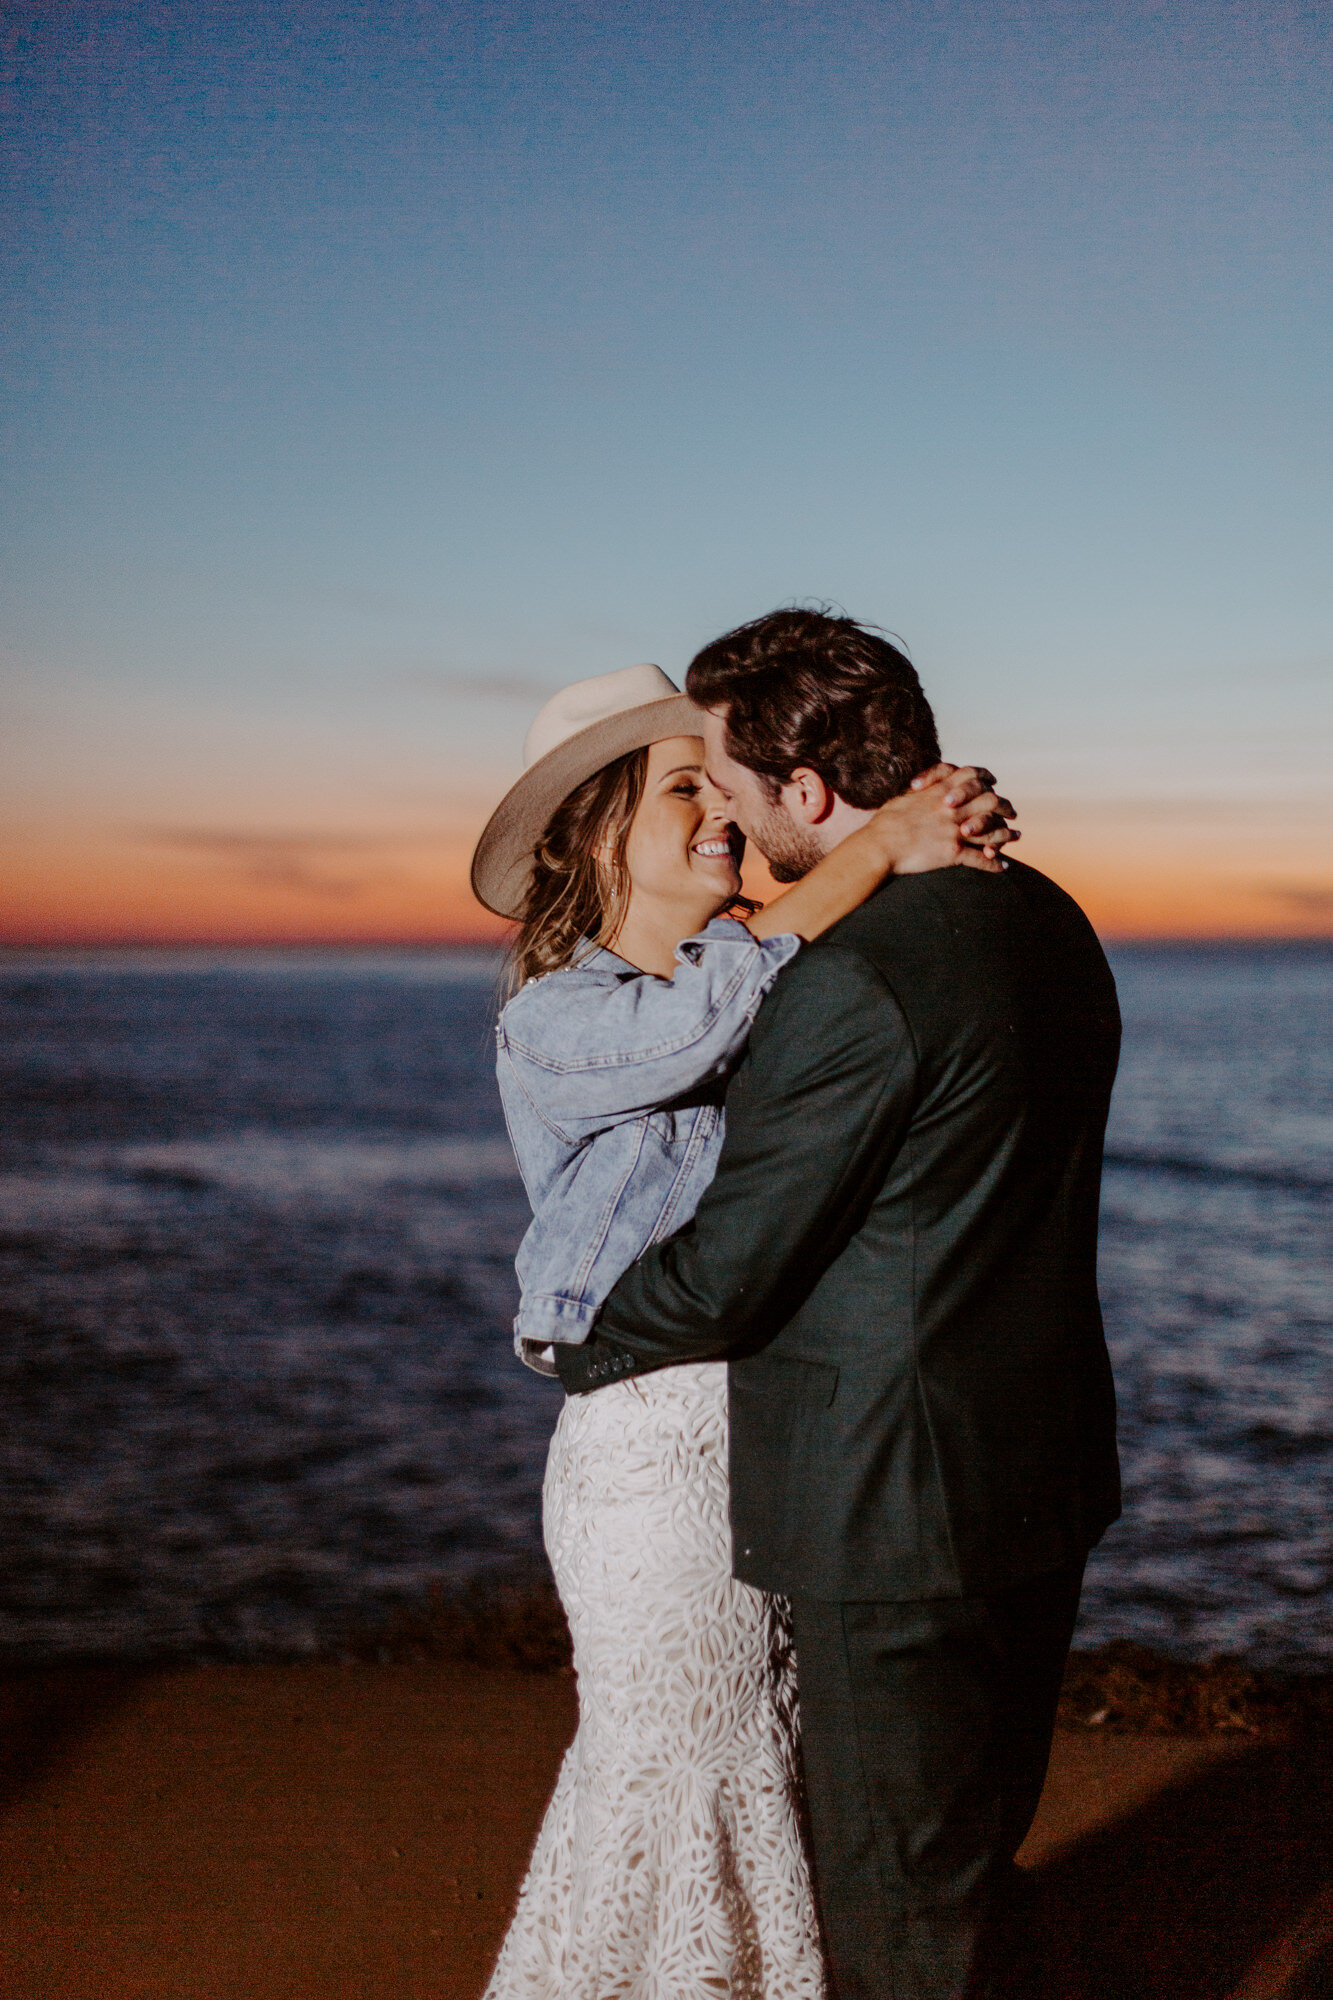 Sunset cliffs wedding, elopement in point loma san diego. Wedding and elopement with pampas grass and pink tones in the bouquets. This was a bohemian or boho styled wedding near the beach.